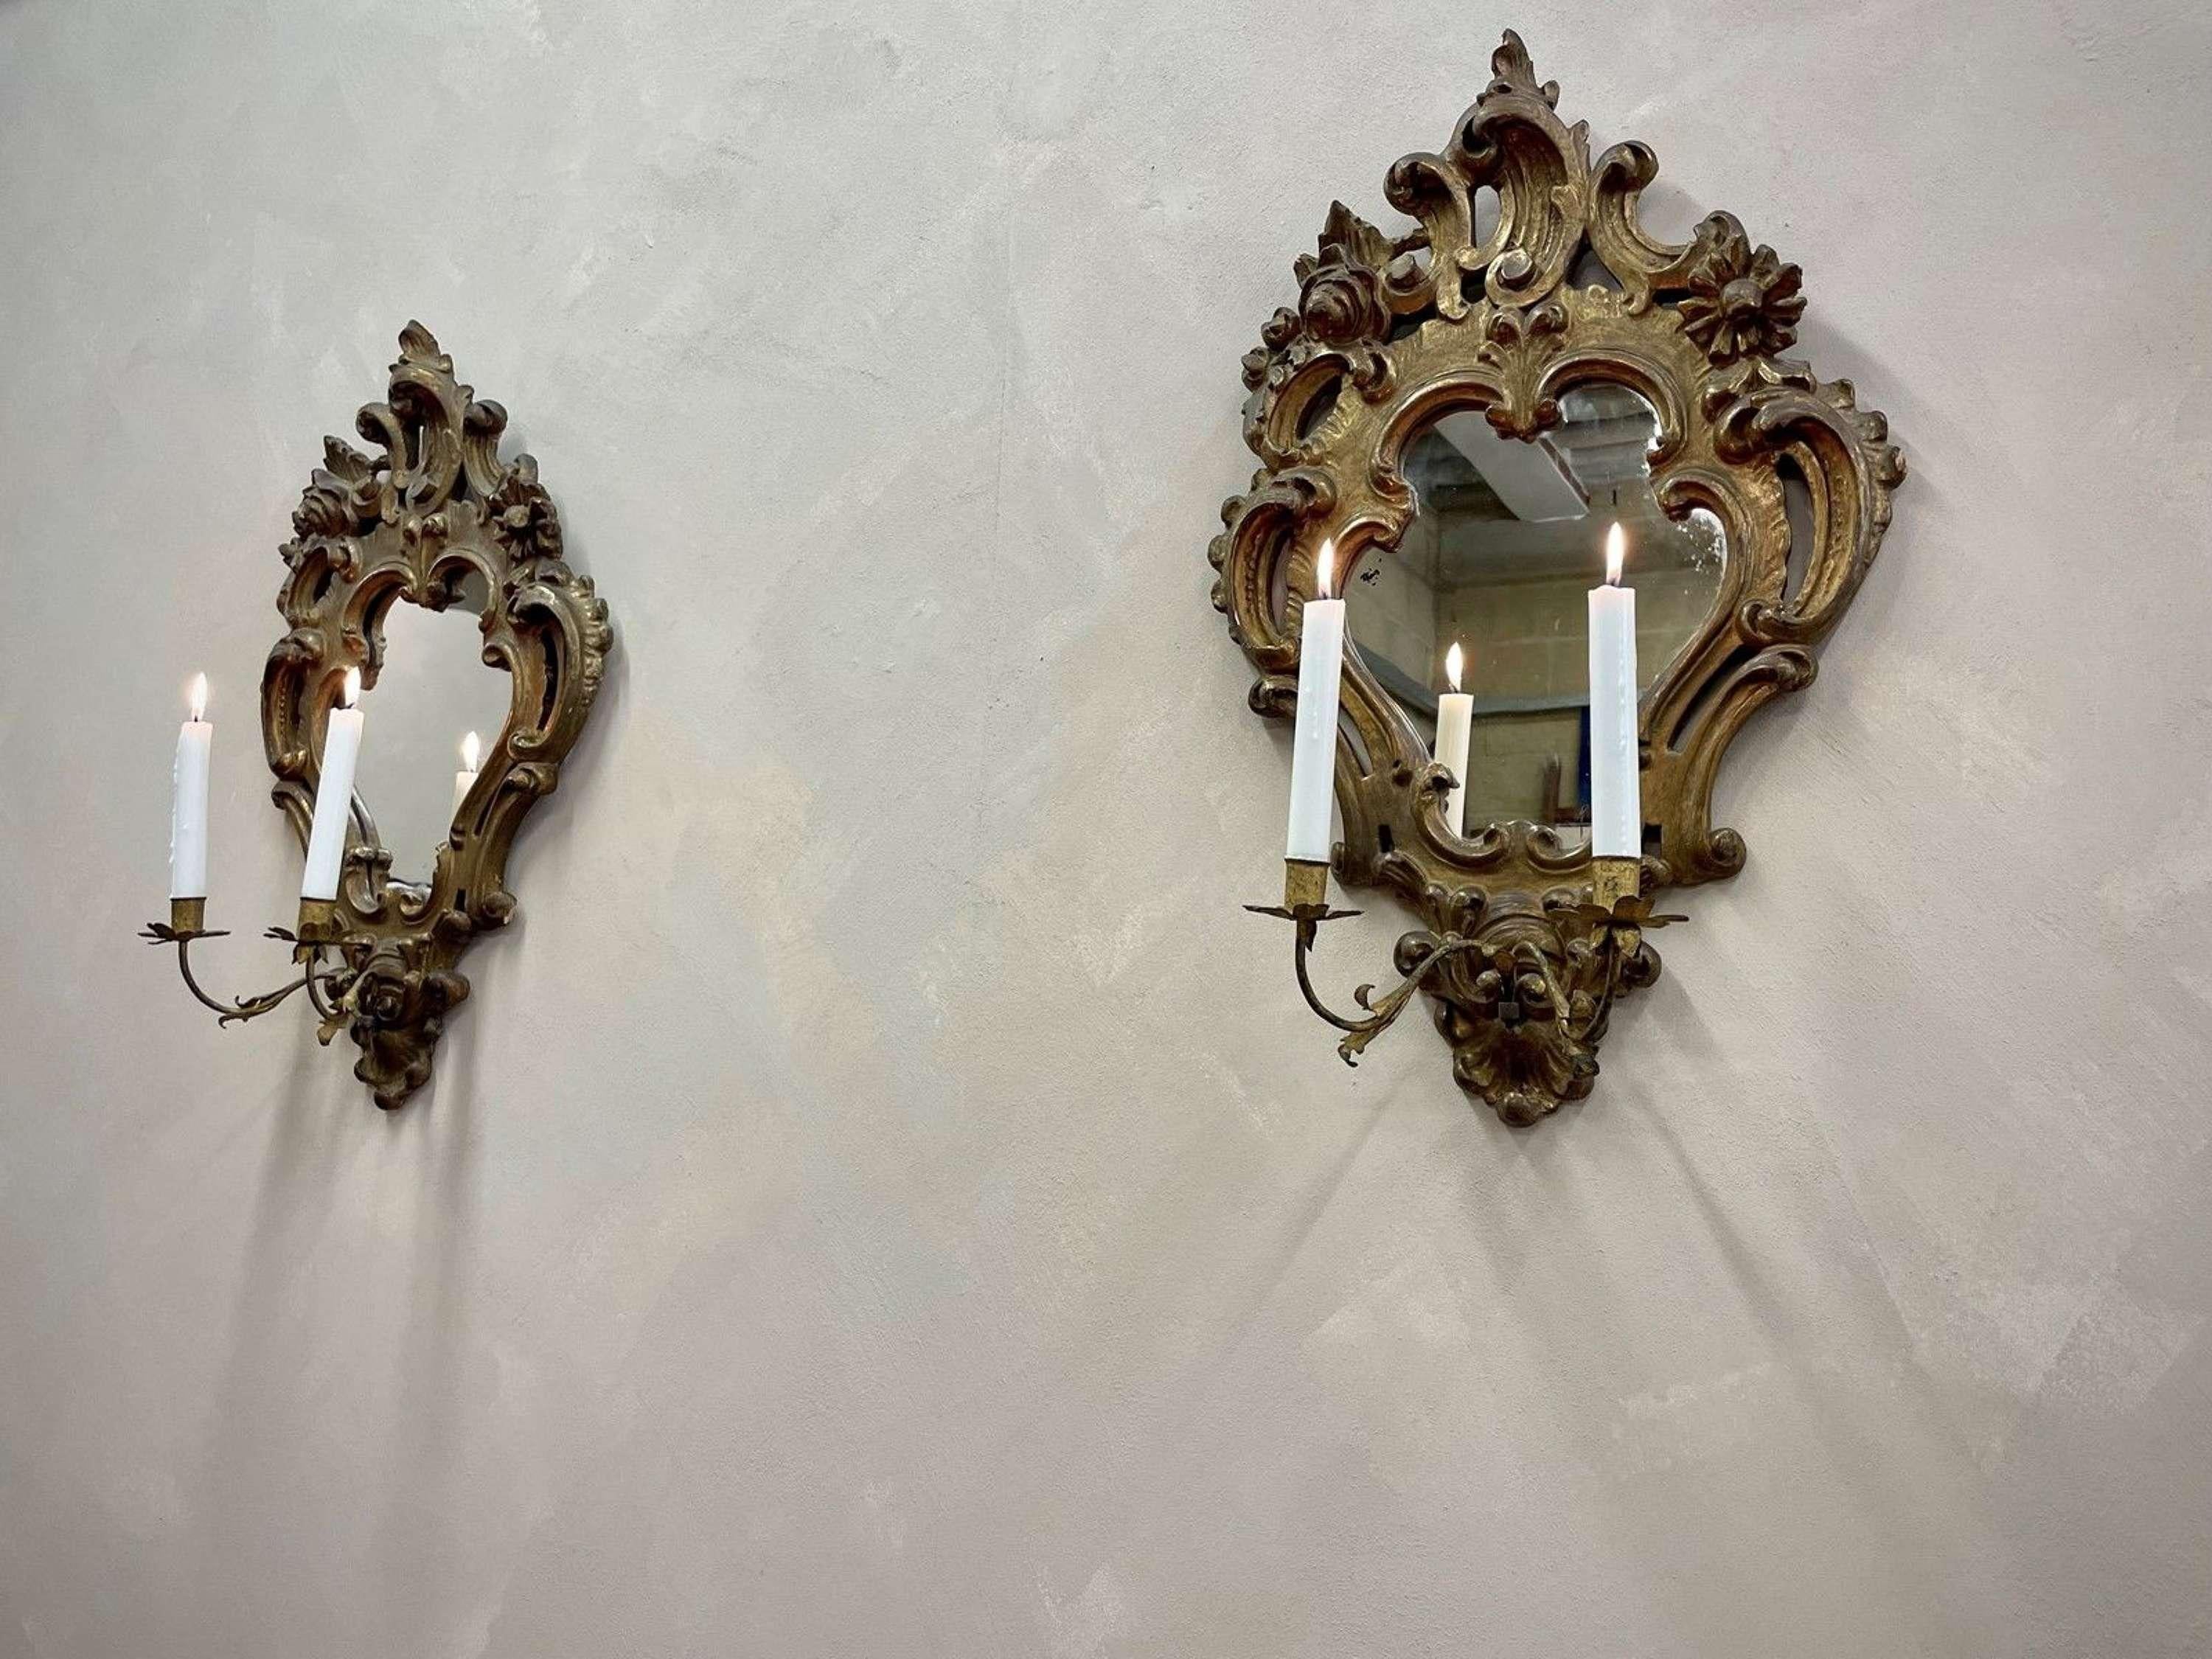 Pair of 19c, Venetian gilt mirror frames with detachable sconces. Later, 20c plate (c1910) with some light foxing. Beautiful and delicate foliate design details.
Some small losses to the Gilt as shown 
Height - 41.5 cm
Width - 33.5 cm
Inside